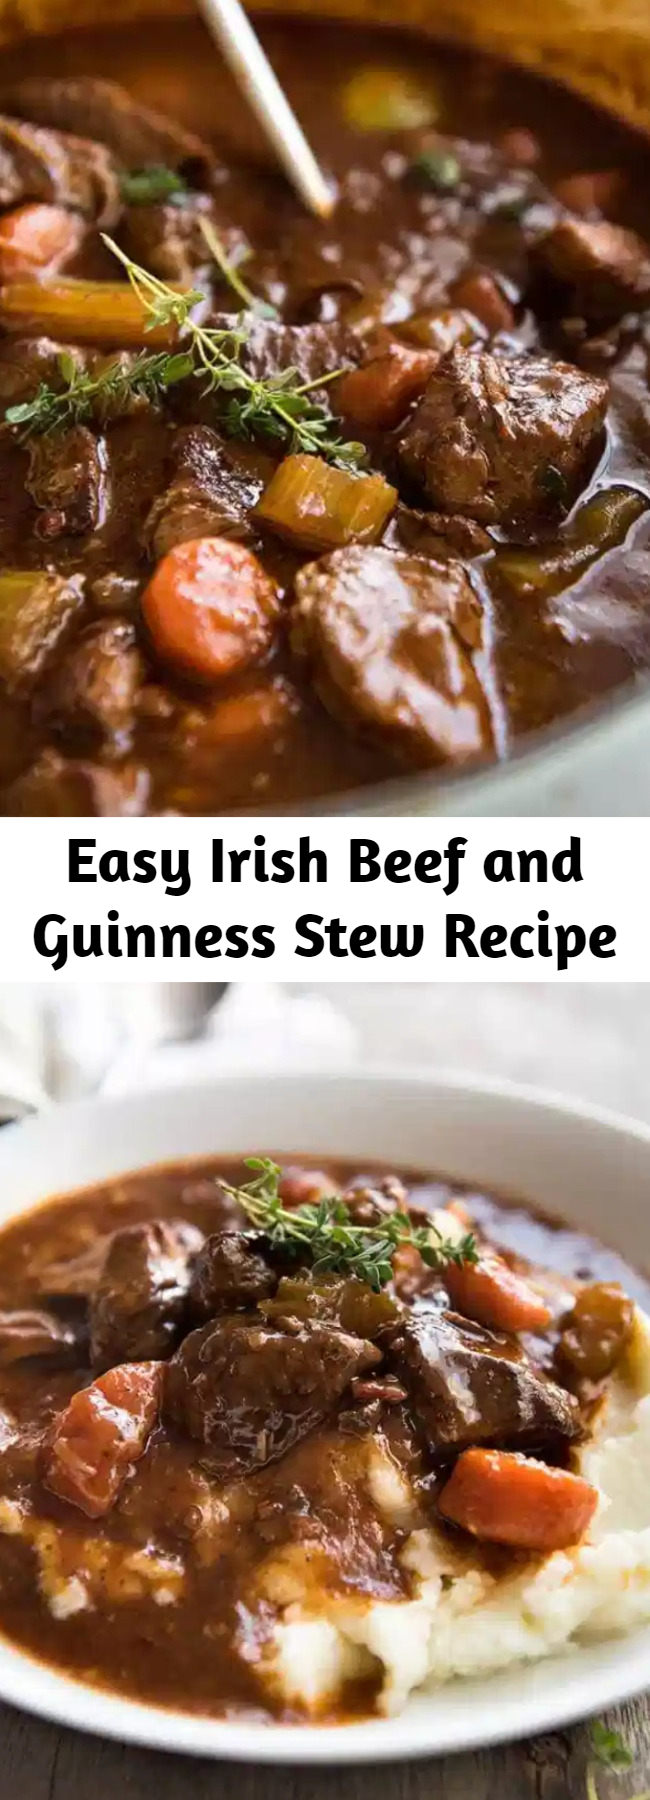 Easy Irish Beef and Guinness Stew Recipe - There’s no greater comfort food than a hearty stew. And the iconic Irish Beef and Guinness Stew might be the king of them all! The Guinness Beer is the secret weapon ingredient in this! Guinness Beer gives the sauce an incredible rich, deep complex flavour, and the beef is fall-apart tender.